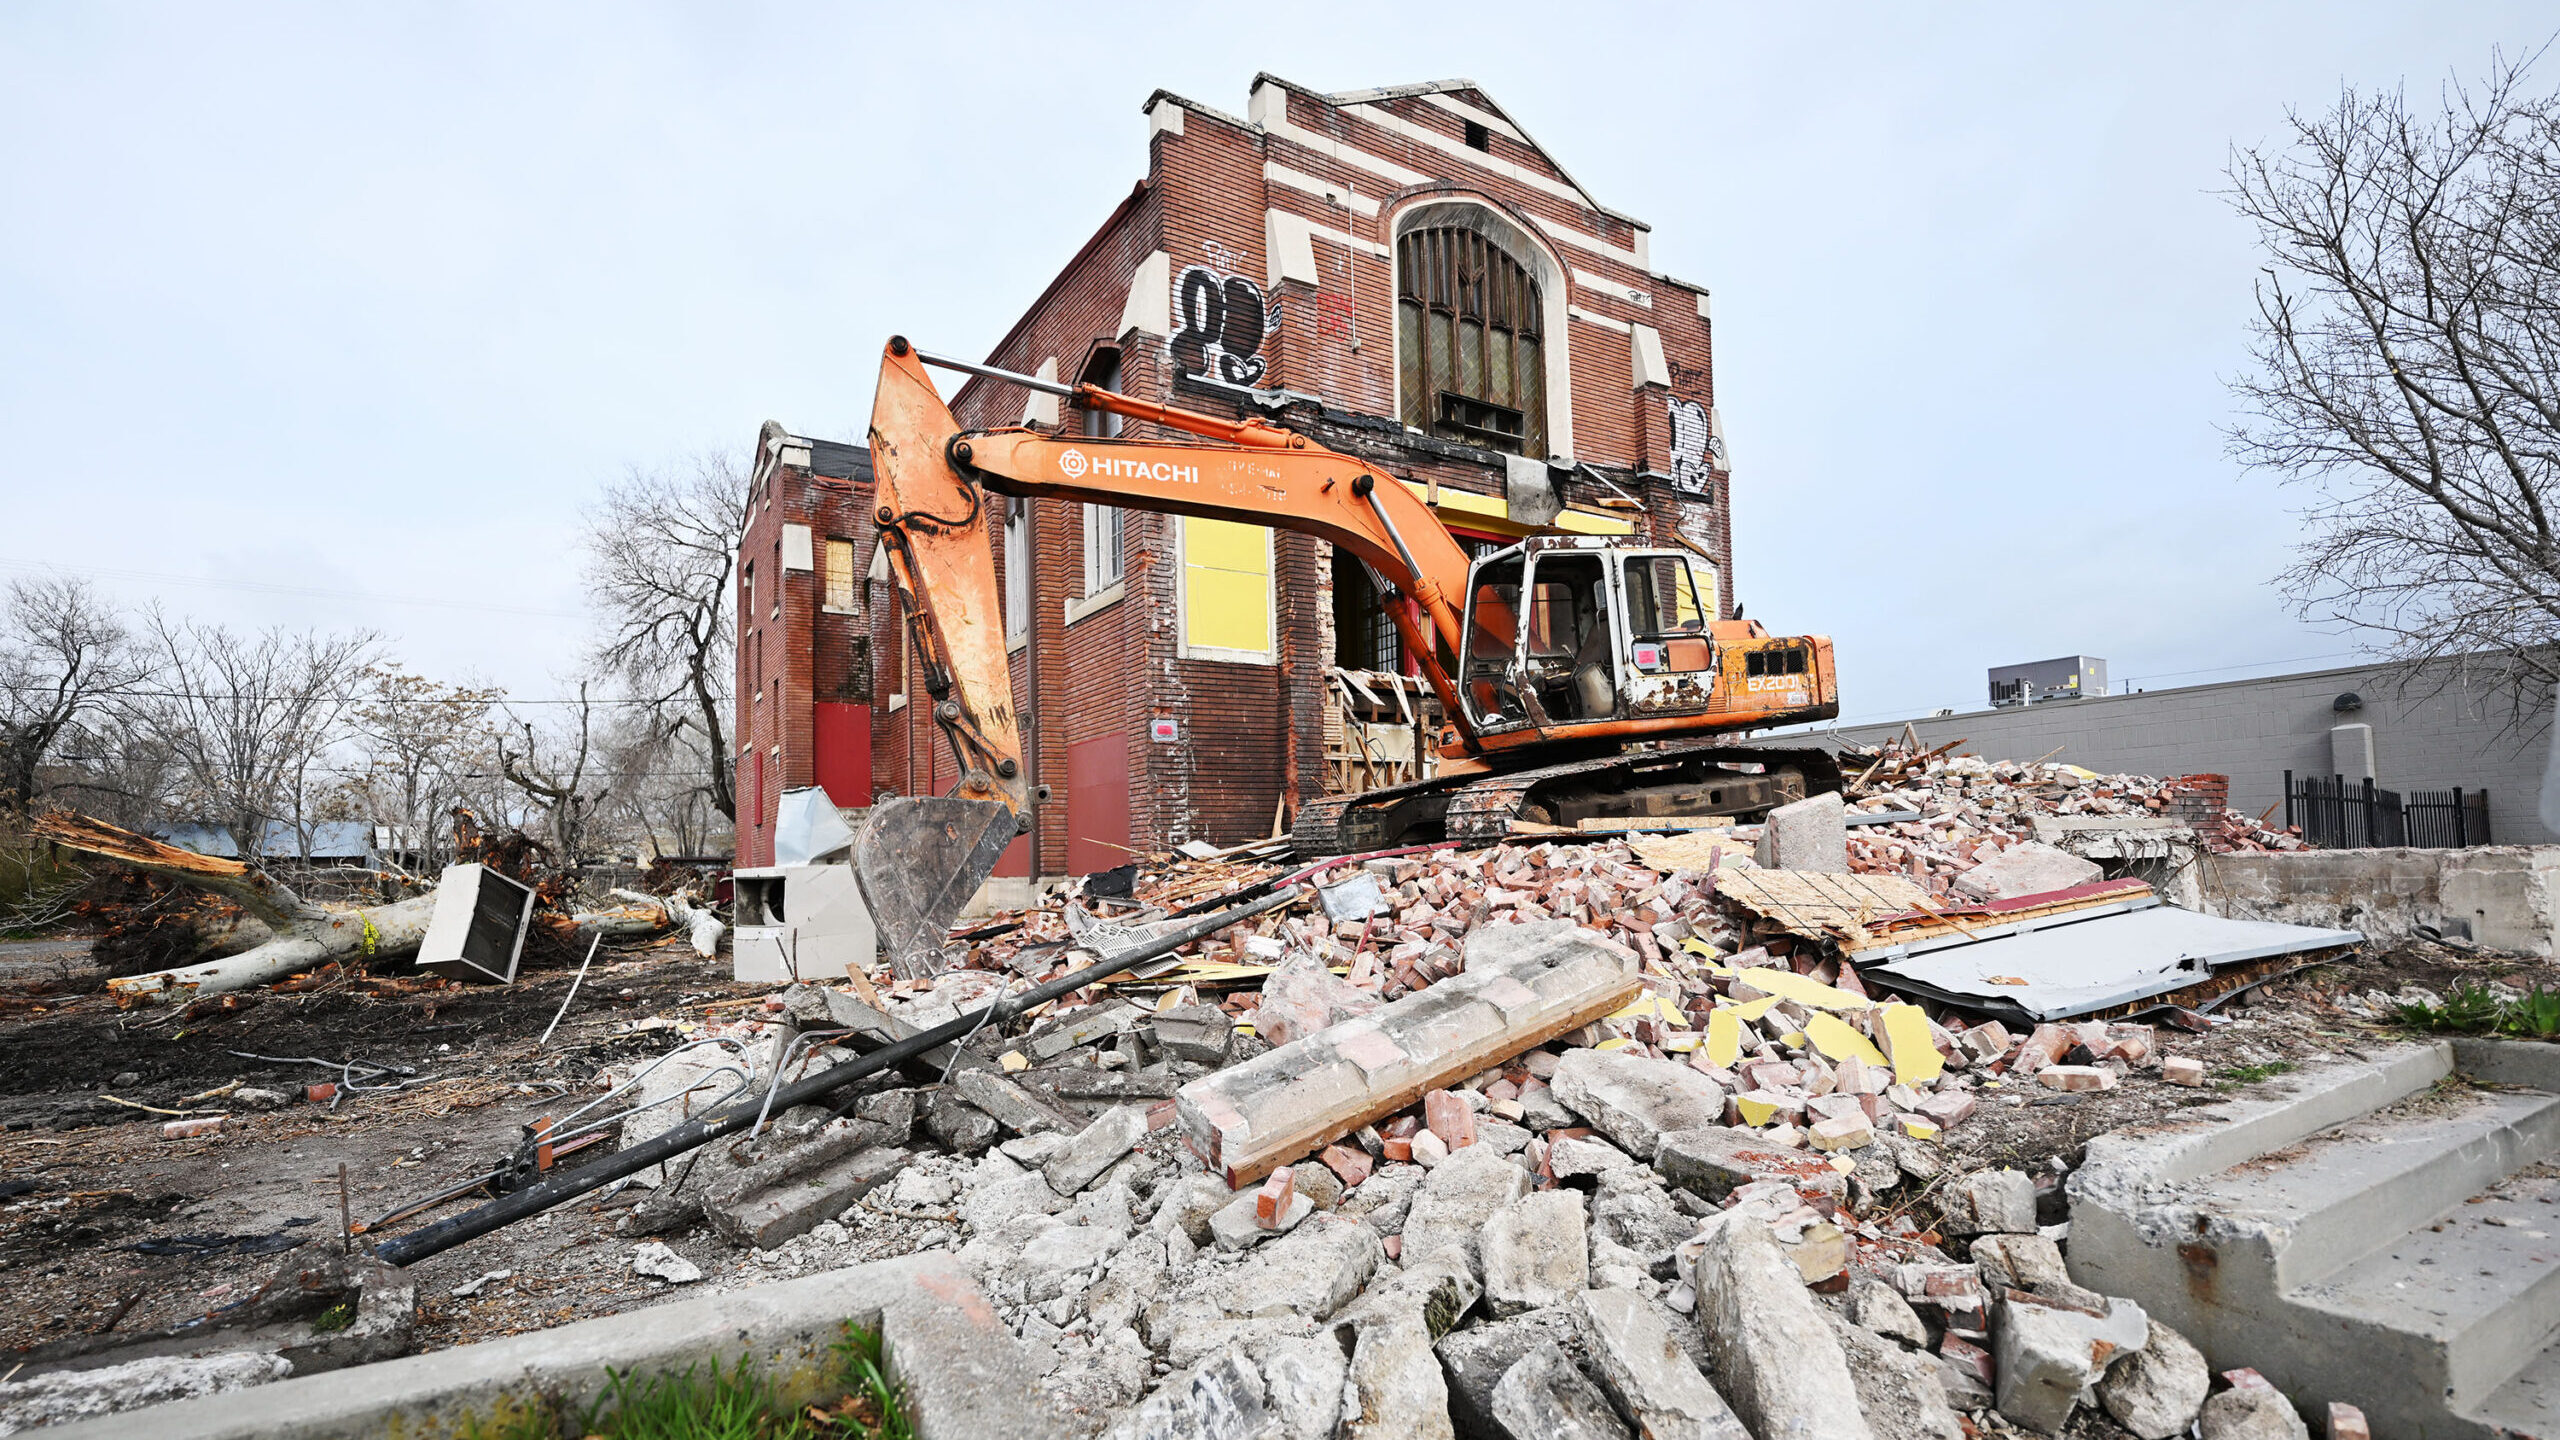 Demolition work occurring at 740 S. 300 West in Salt Lake City has been halted due to lack of prope...